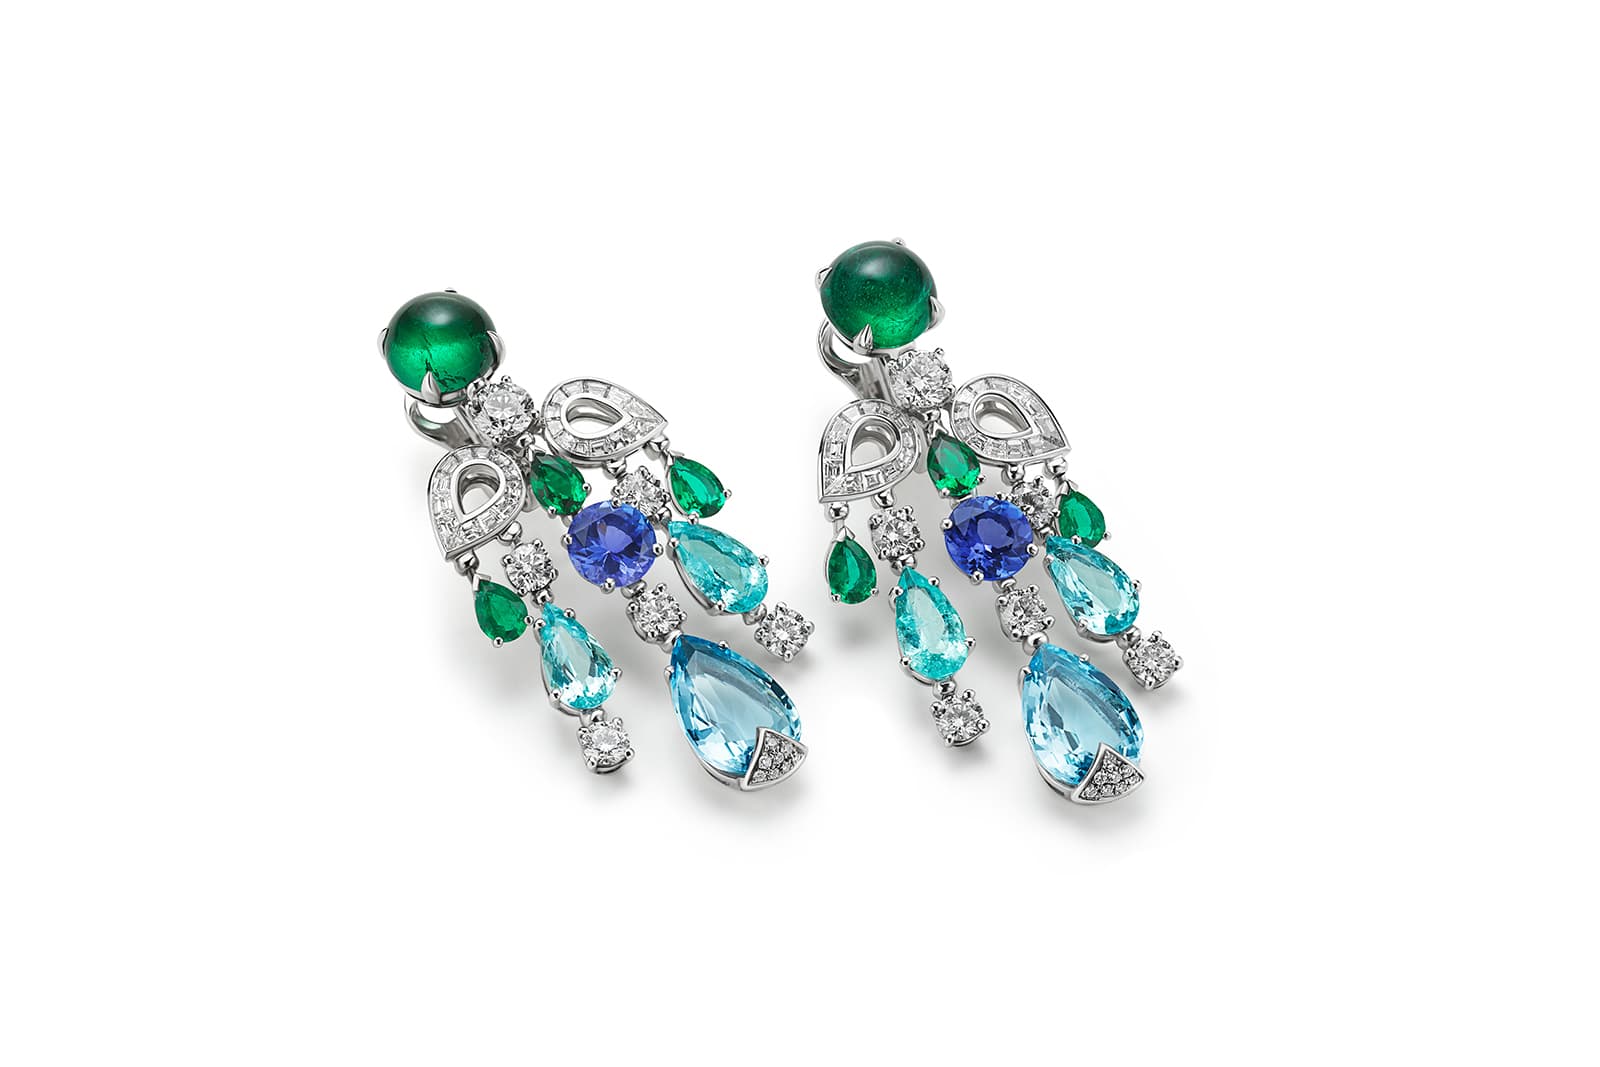 This Bulgari Colour Journeys Paraiba Tourmaline High Jewellery earrings in white gold with 2 cabochon-cut emeralds (Zambia – 3.33 ct – 3.15 ct), 2 pear aquamarines (6.50 ct), 4 Paraiba tourmalines (4.58 ct), 2 round tanzanites (2.58 ct), 6 pear emeralds (1.84 ct), 48 fancy-step cut diamonds (F-G VVS-VS 1.30 ct), 12 round brilliant-cut diamonds and pavé-set diamonds (D-F IF-VVS 3.10 ct)